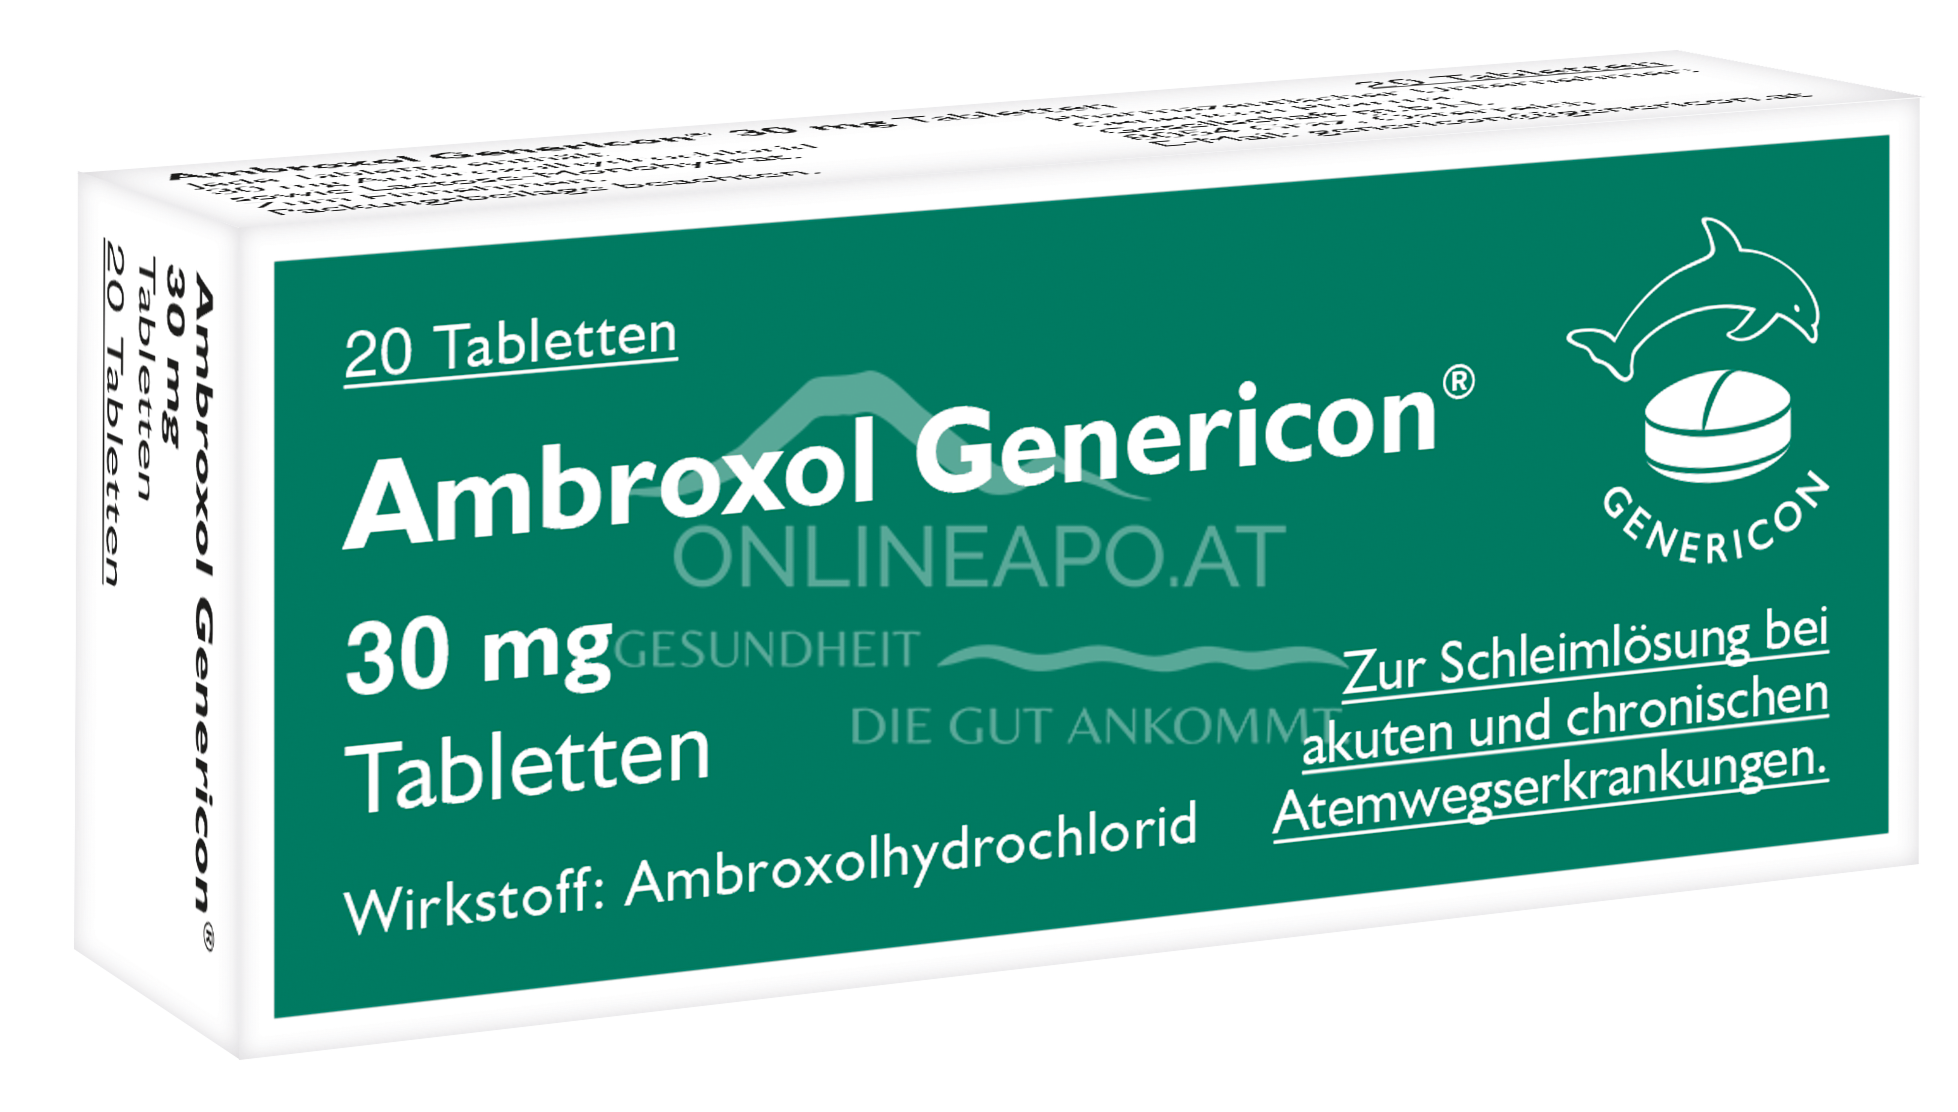 Ambroxol Genericon 30 mg Tabletten